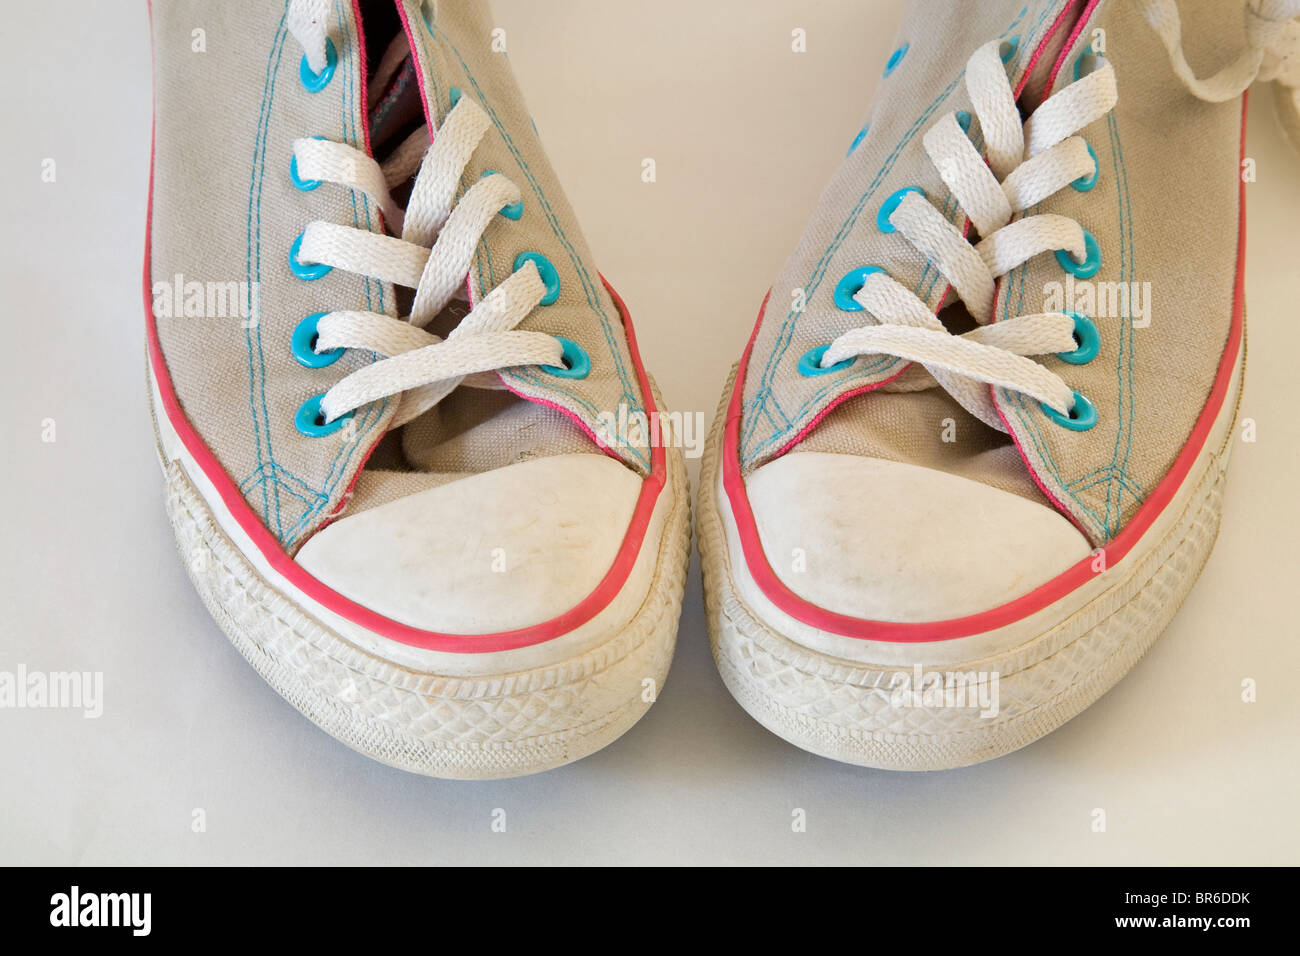 A pair of old, used, high-topped Converse sneakers or tennis shoes. Stock Photo